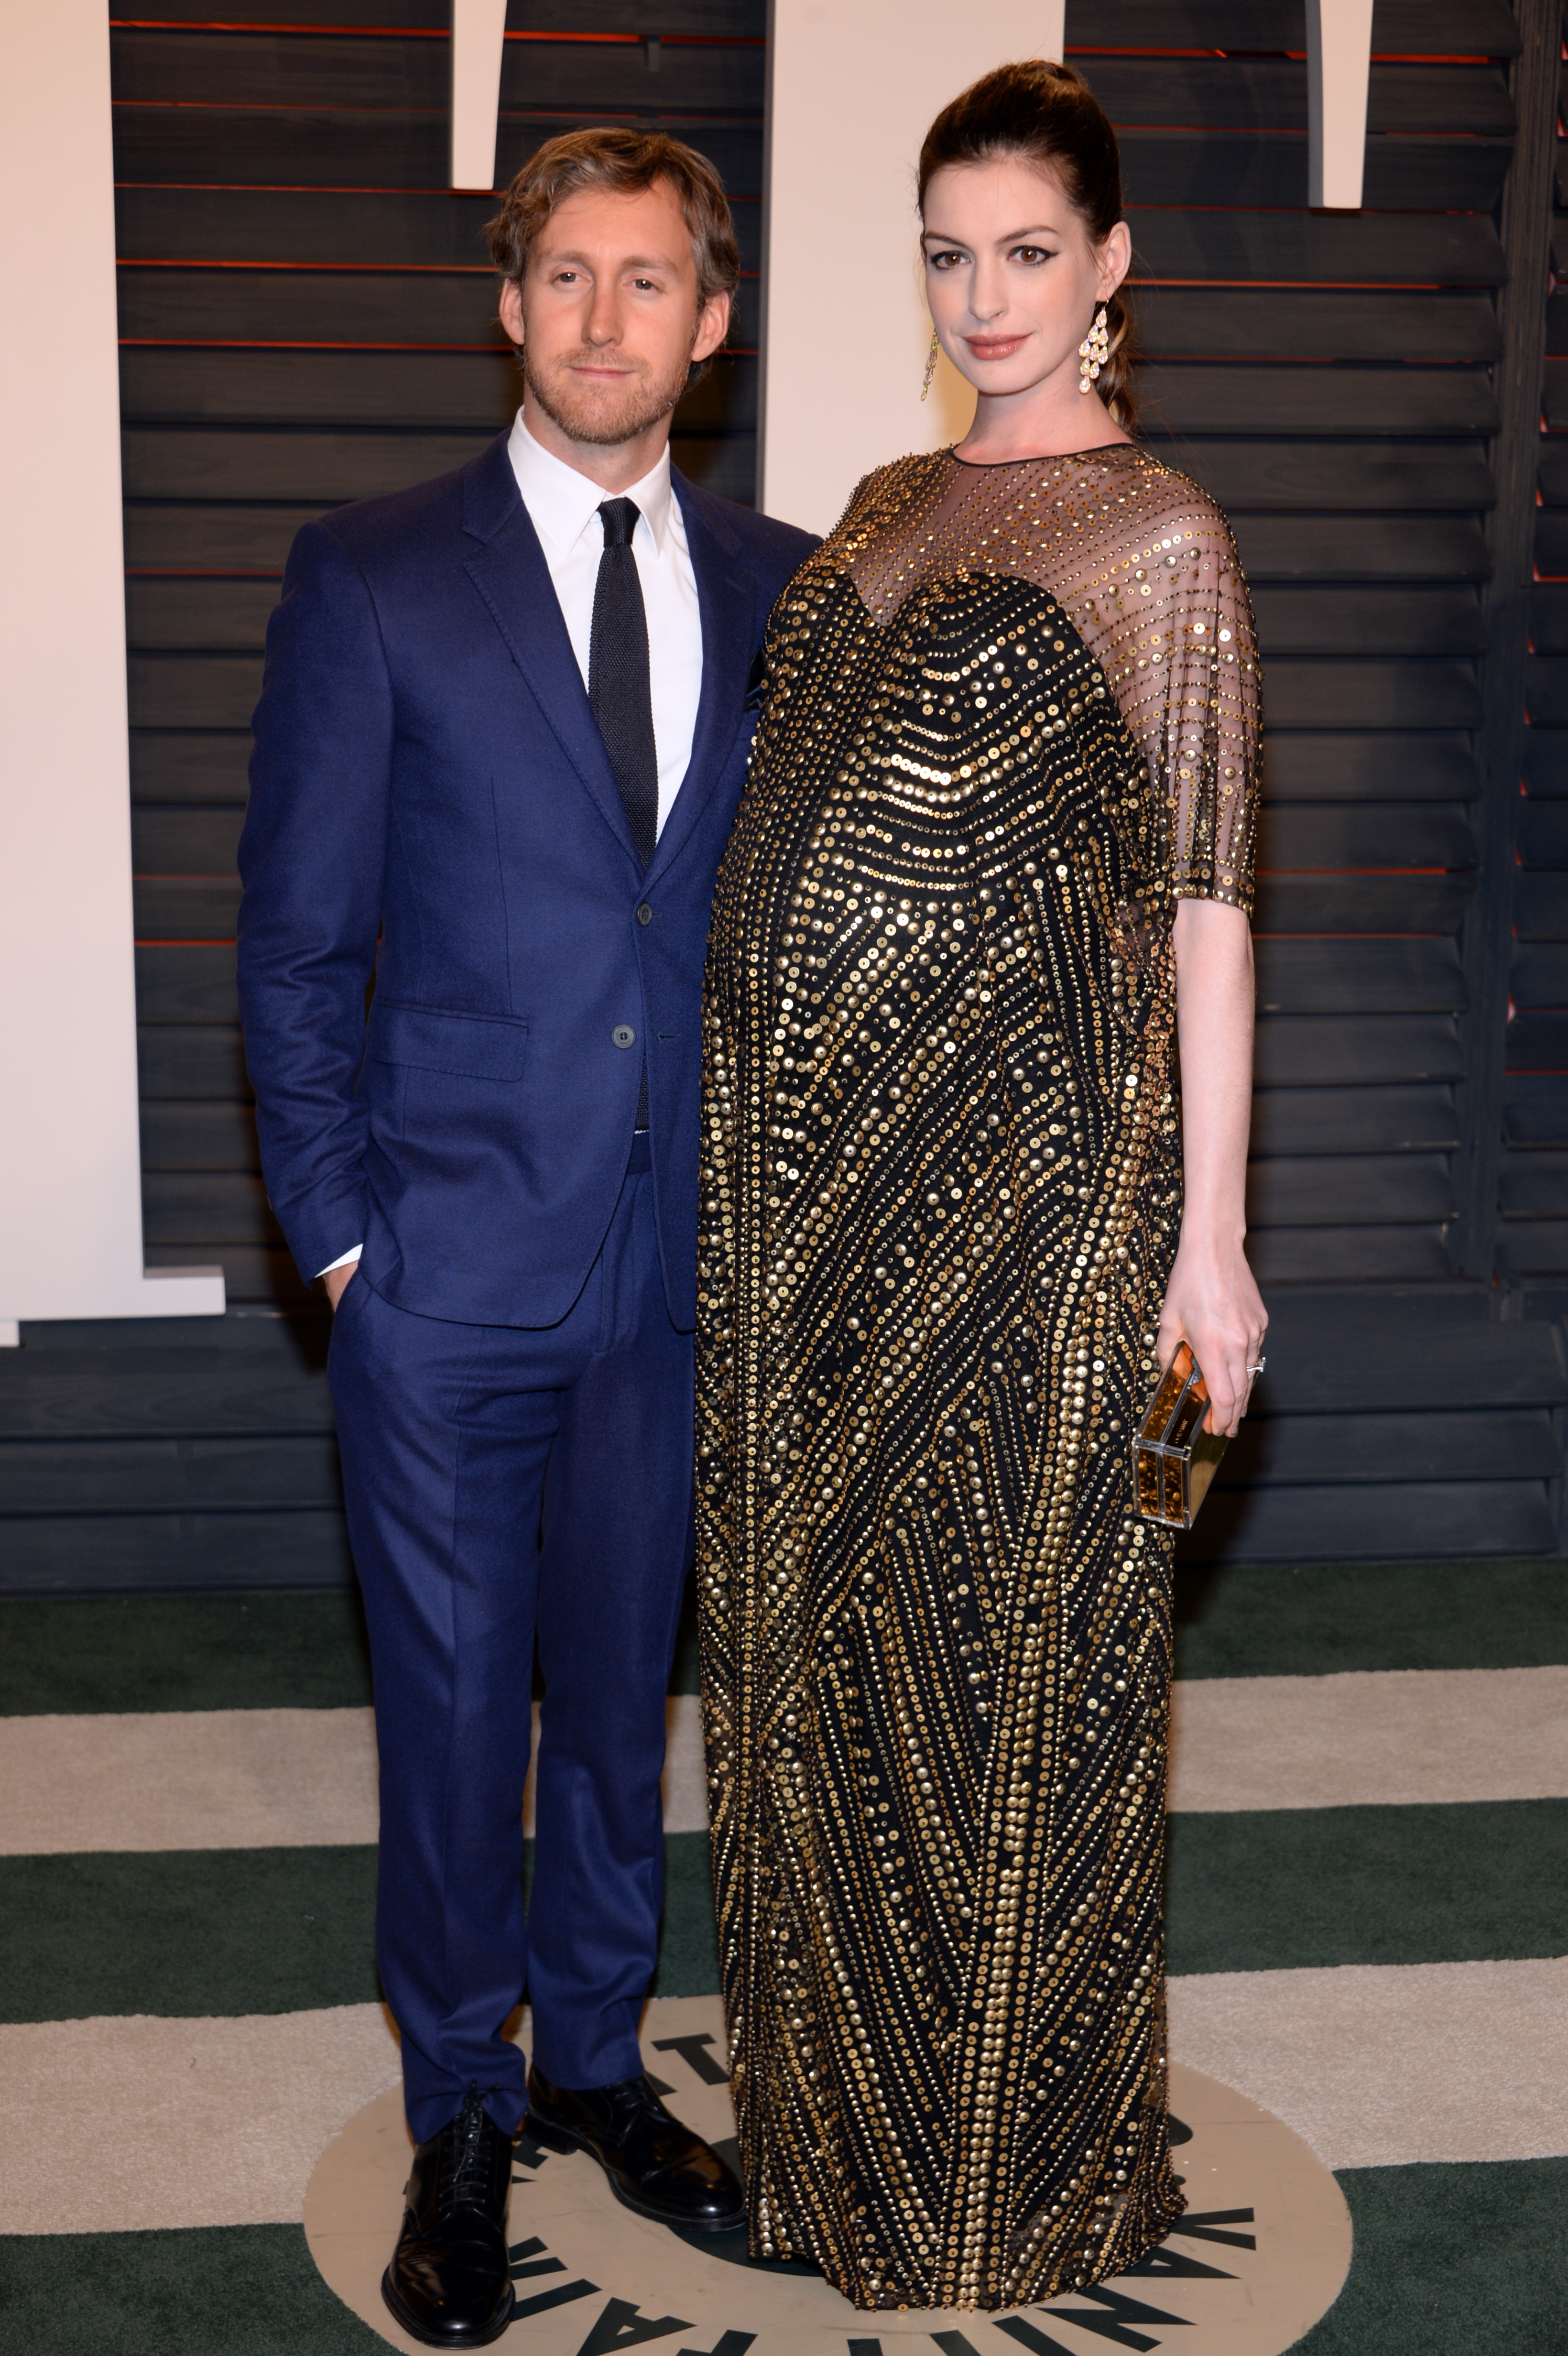 Anne Hathaway and Adam Shulman arrive to the Vanity Fair Party following the 88th Academy Awards at The Wallis Annenberg Center for the Performing Arts in Beverly Hills Sunday evening, February 28, 2016. | Source: Getty Images